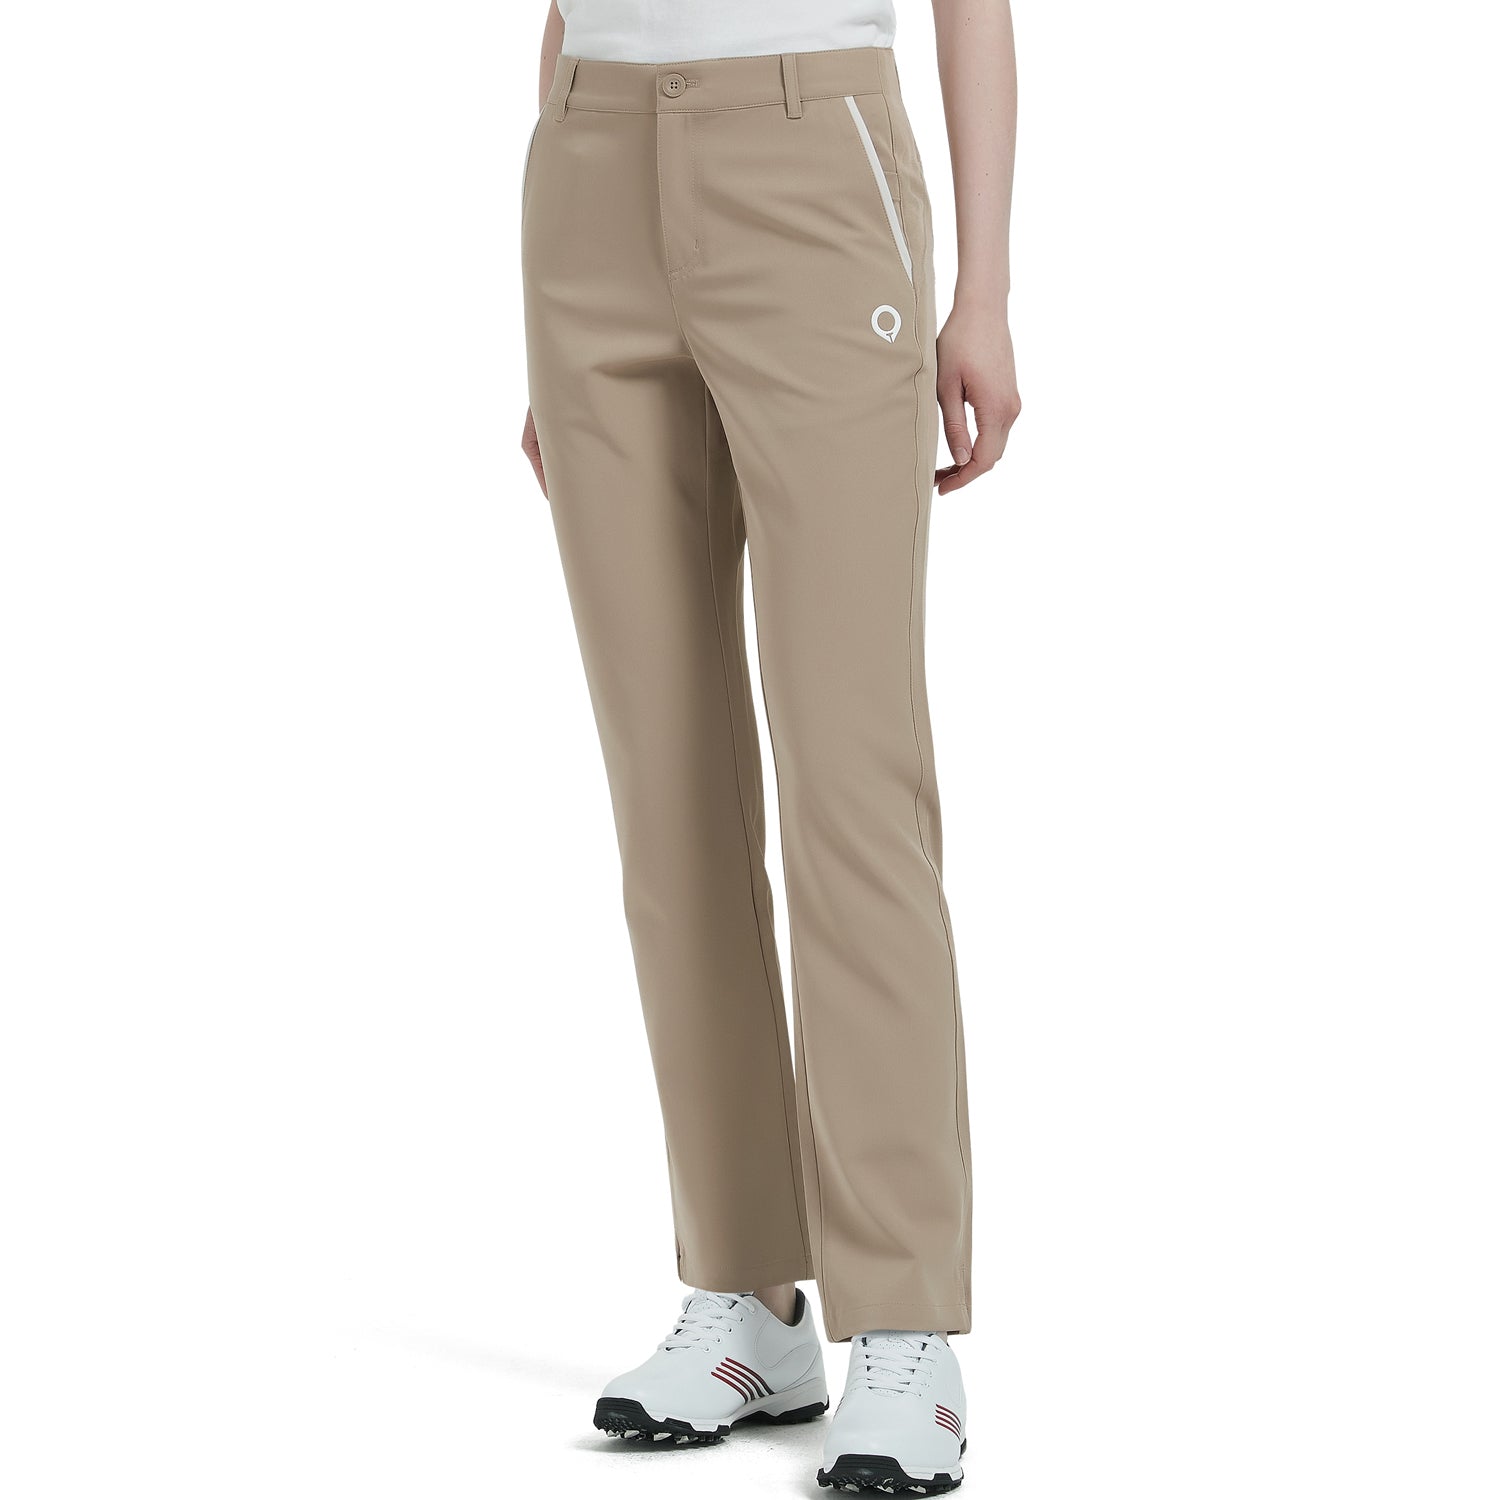 Lesmart Women's Stretch Quick Dry Casual Pull on Pants